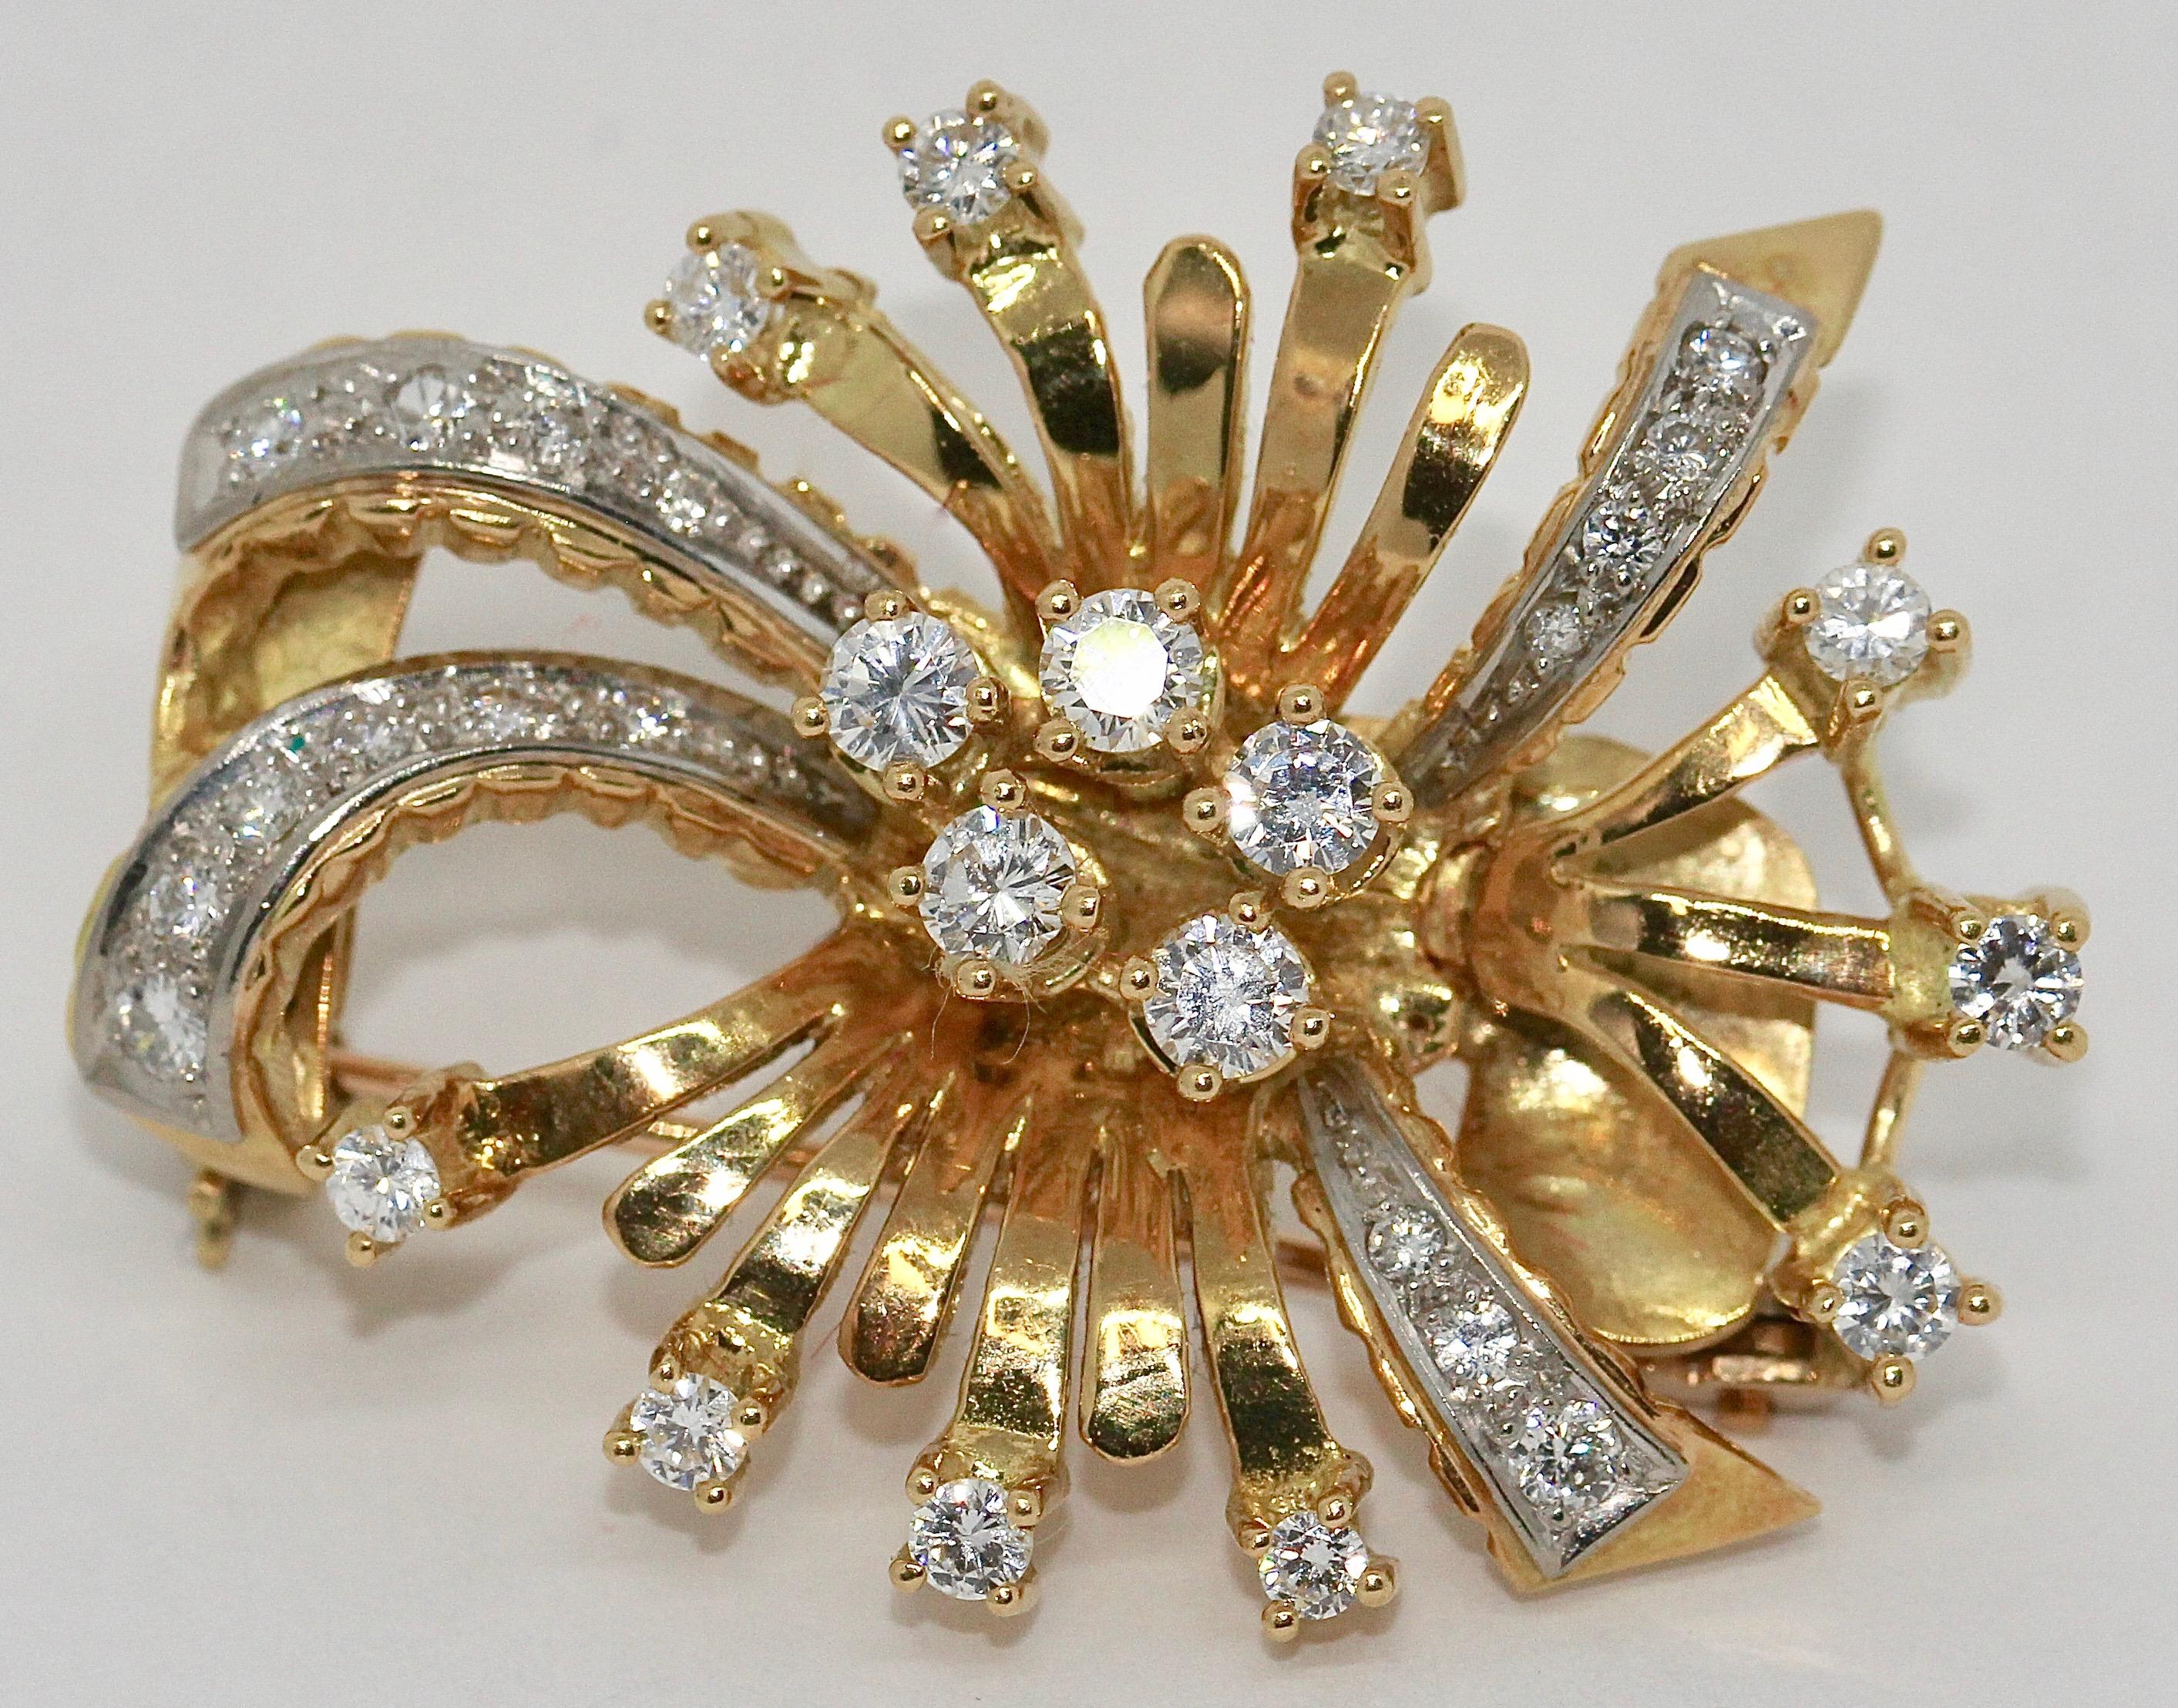 Diamond Brooch, 18 Karat Gold, in floral design.
Brooch can also be worn as a pendant.

The diamonds are of very good quality, color and purity.